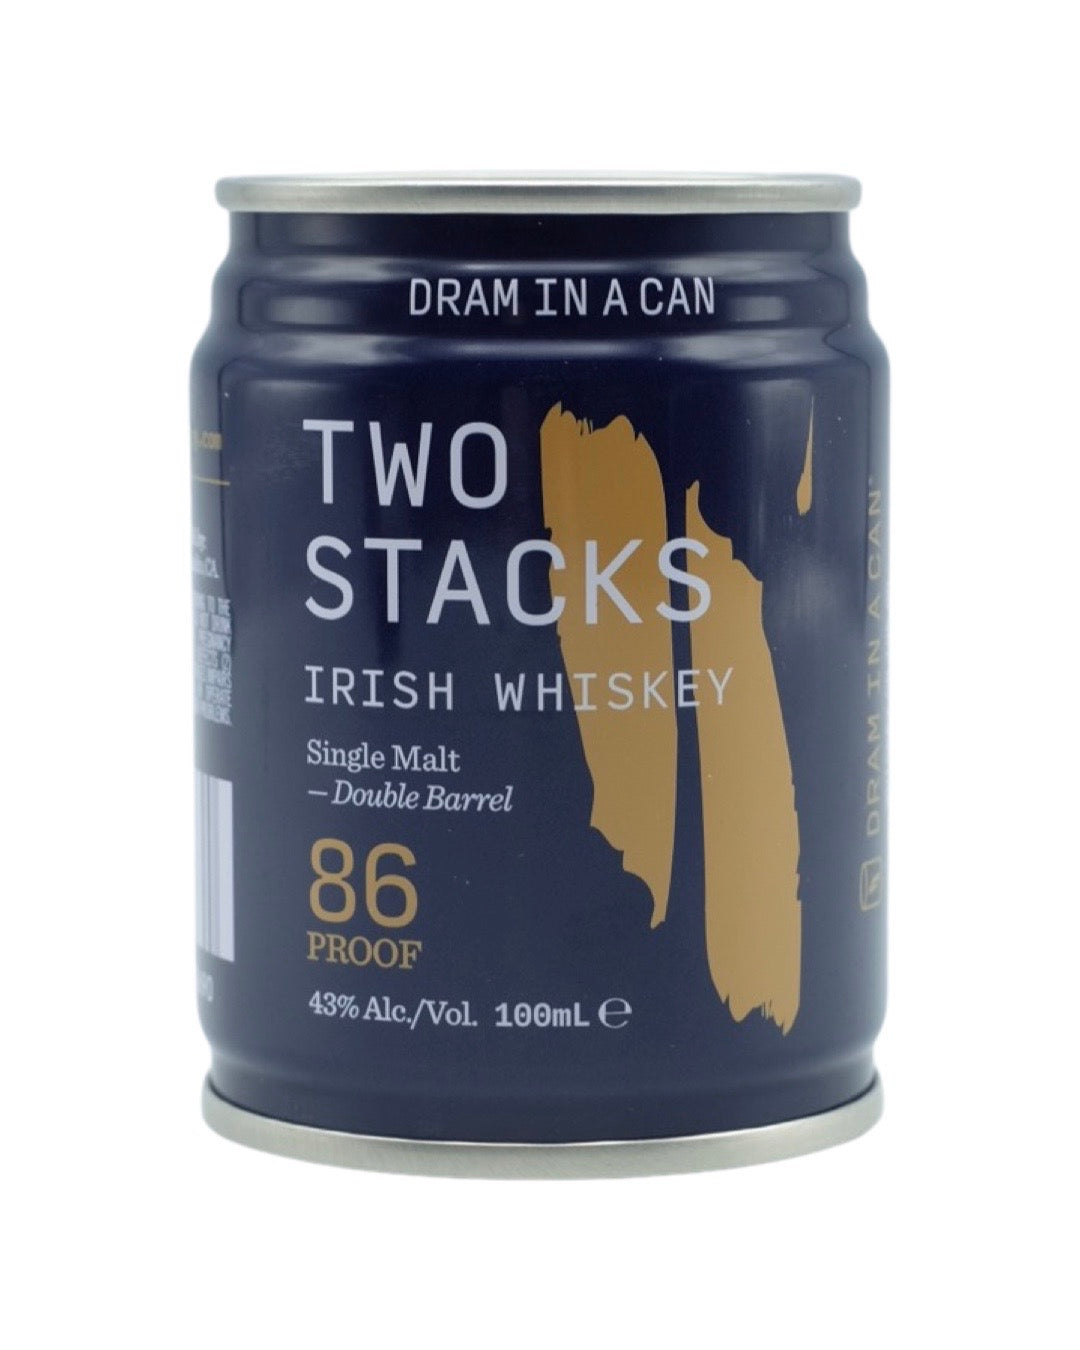 Two Stacks Dram in a Can Single Malt